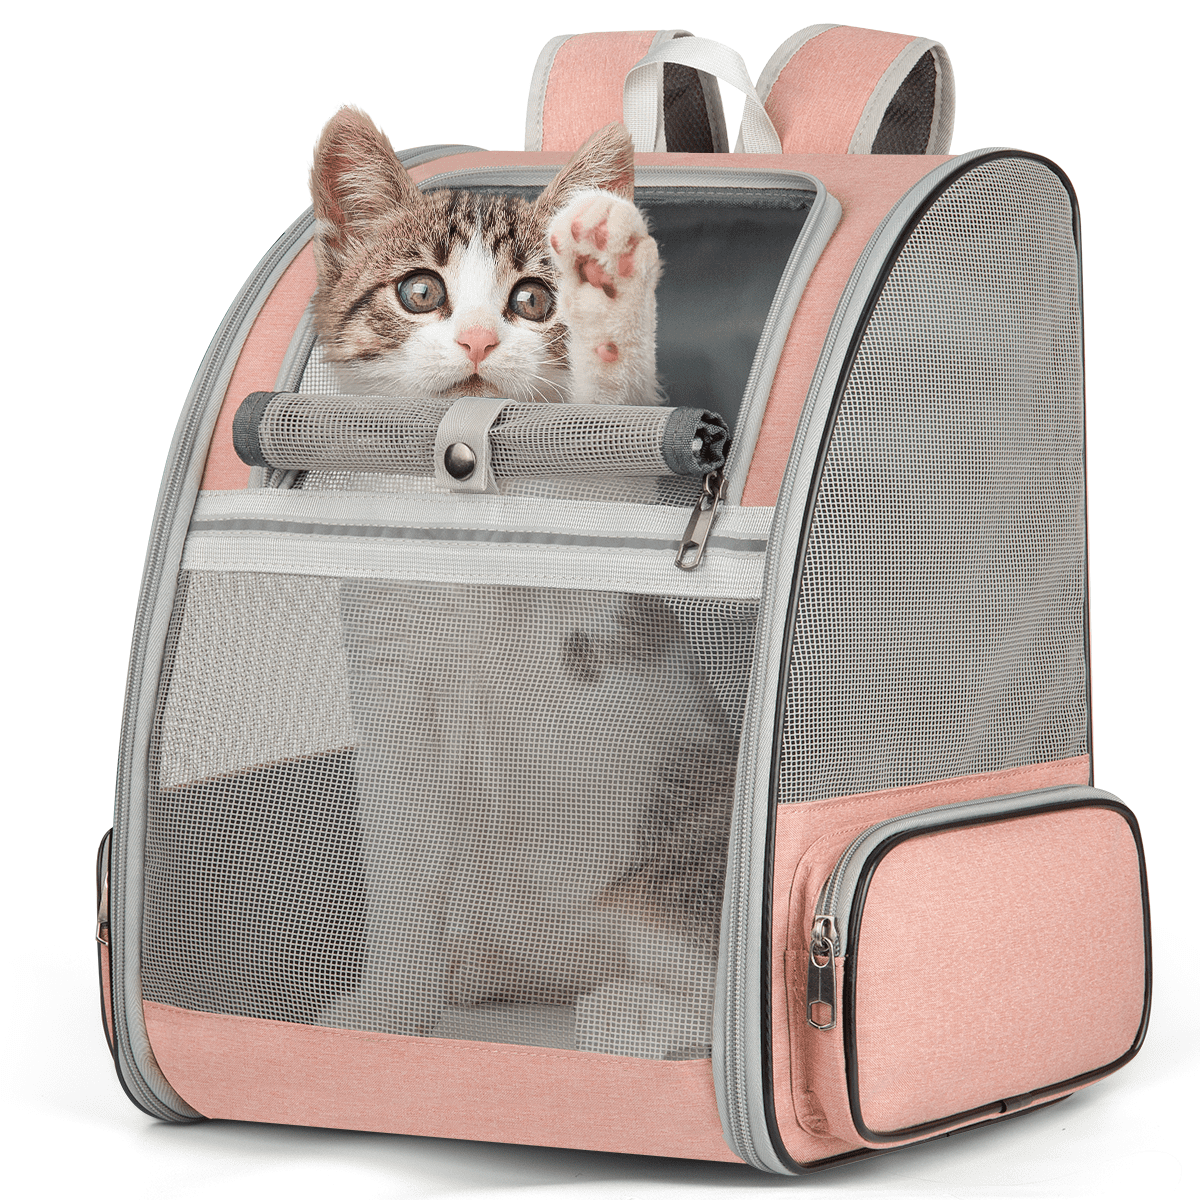 Lesure TSA Airline Approved Cat Carrier-2 in 1 Soft-Sided Pet Carrier  Backpack for Small Meduim Puppy and Cats up to 15 Lbs Grey